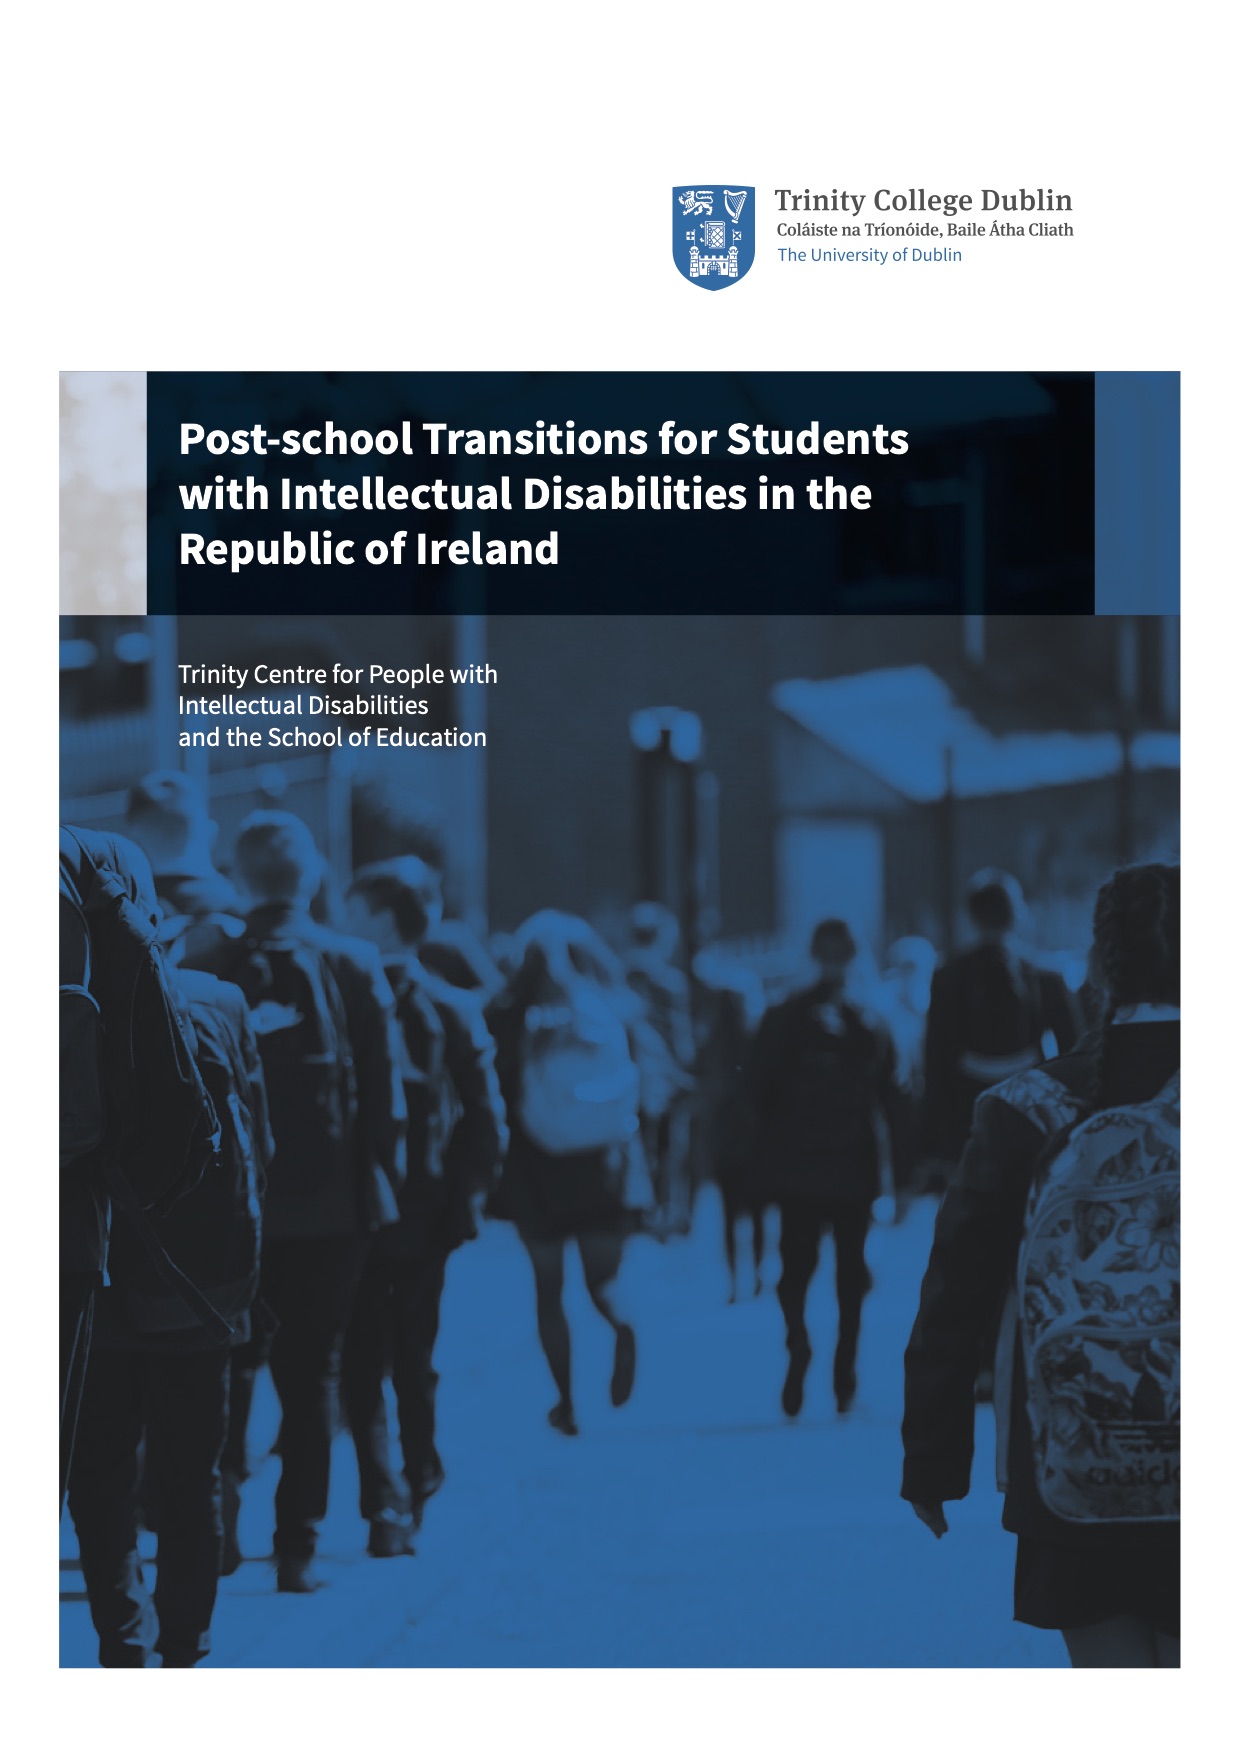 Post-school Transitions for Students with Intellectual Disabilities in the Republic of Ireland